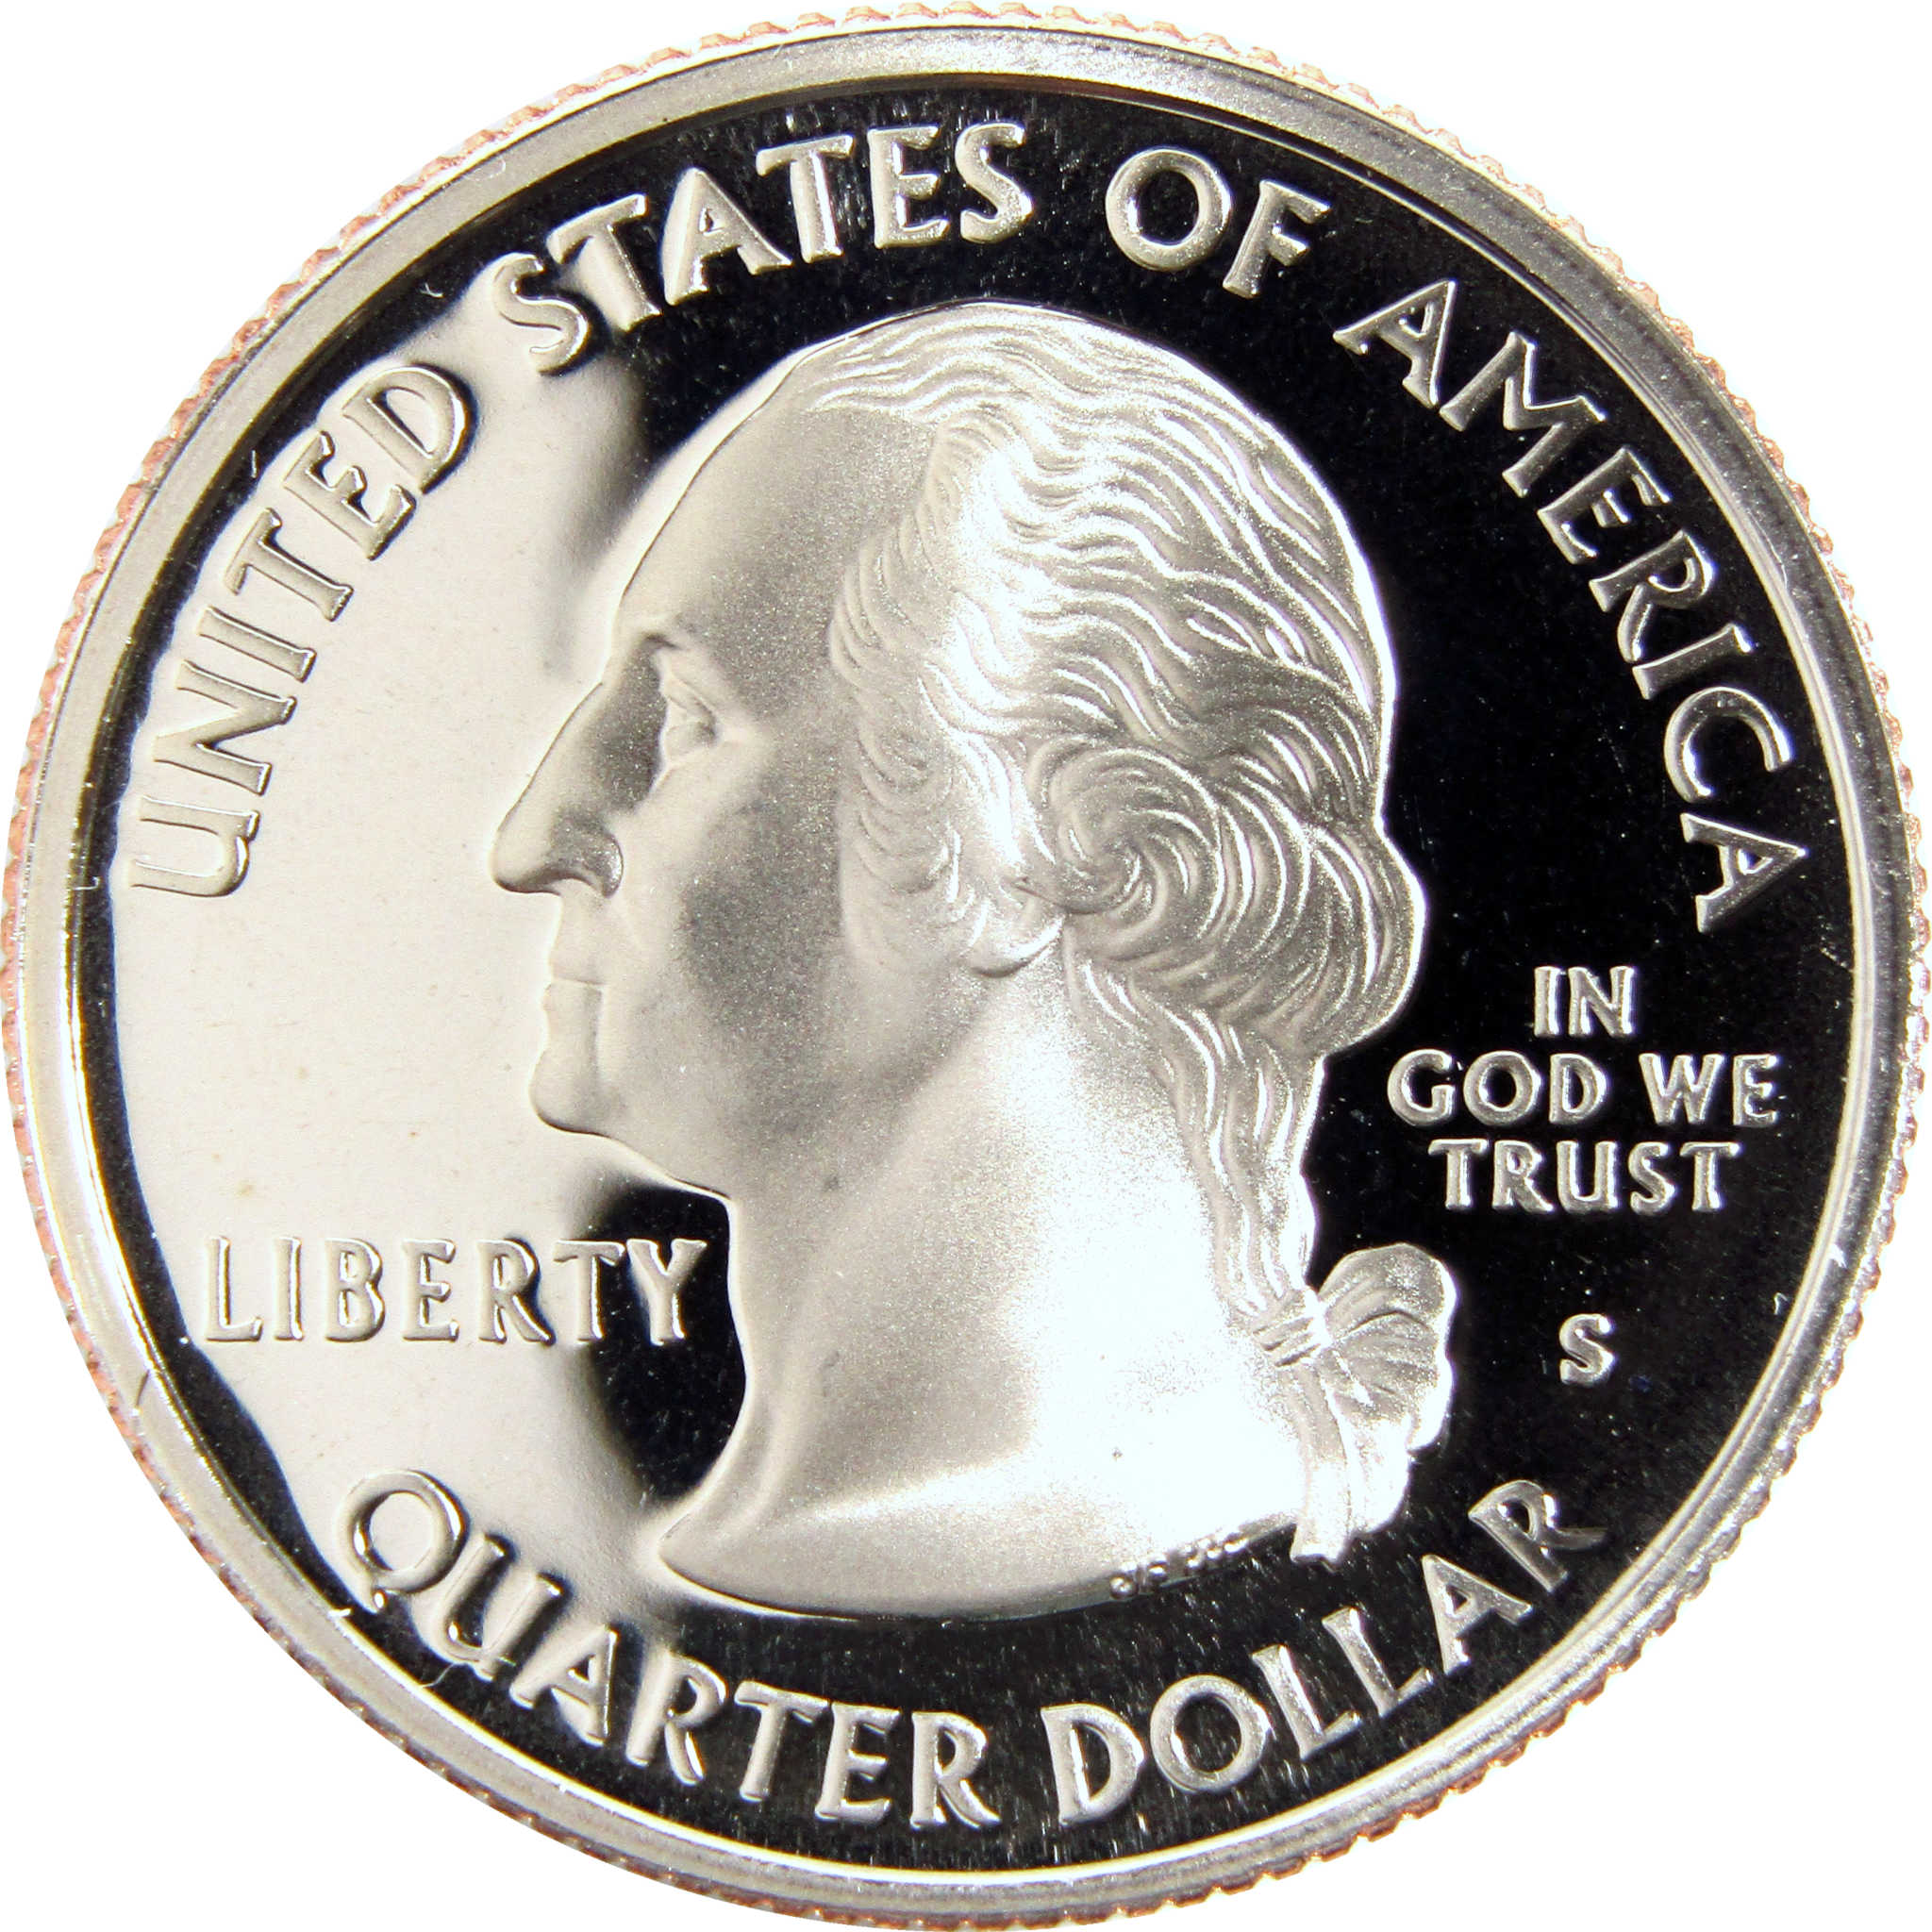 2007 S Idaho State Quarter Clad 25c Proof Coin